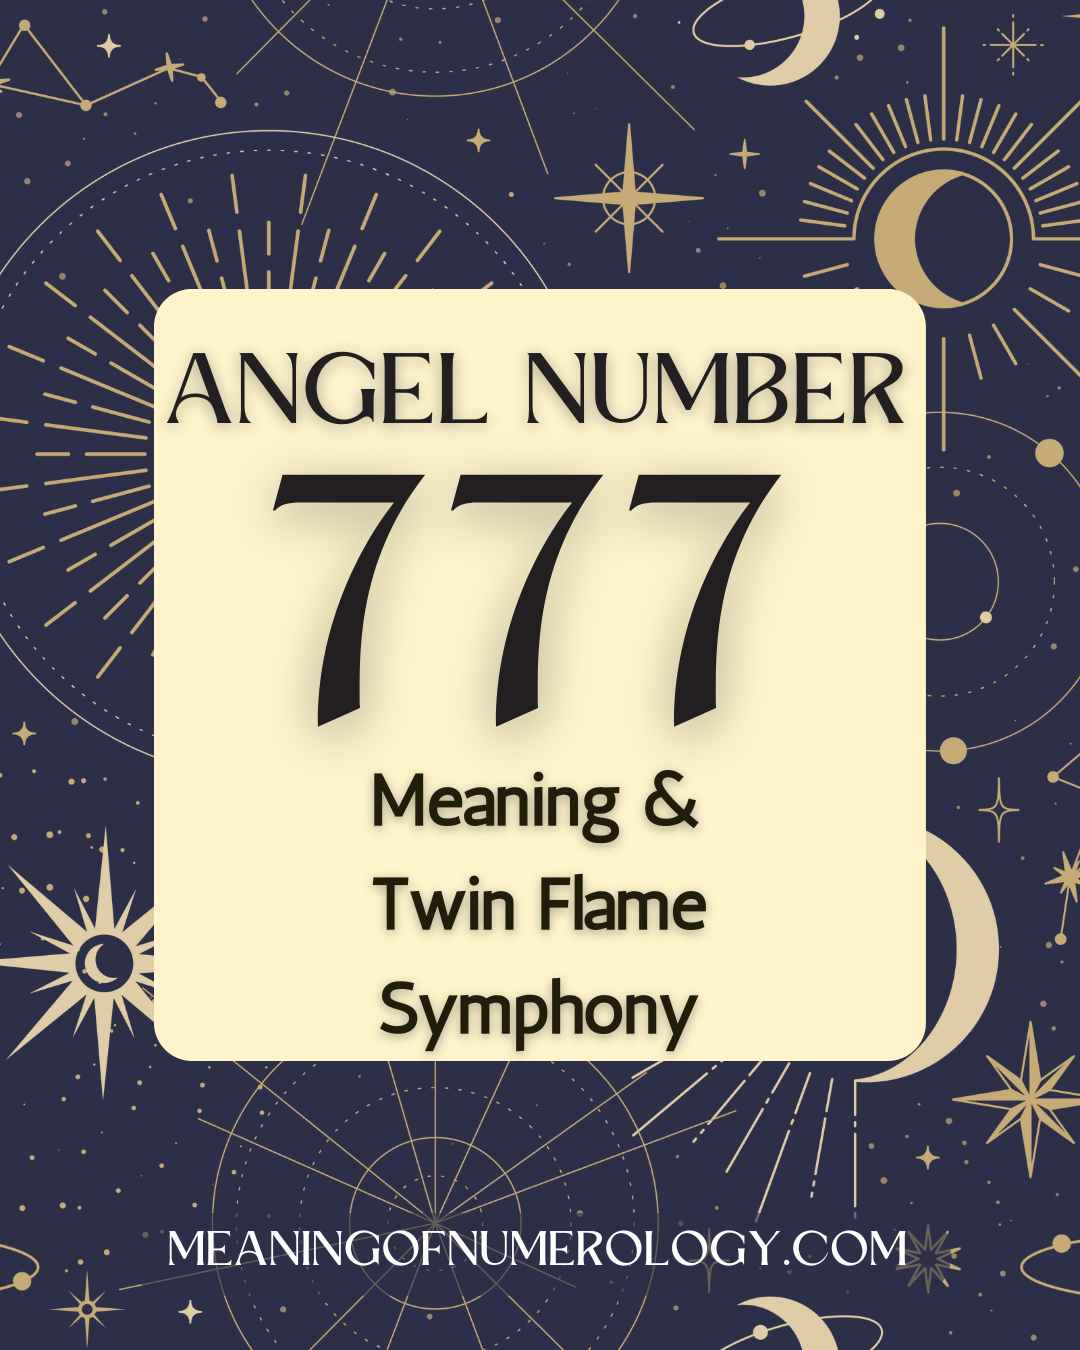 Purple Mystic Astrology Moon Angel Number 777 Meaning & Twin Flame Symphony